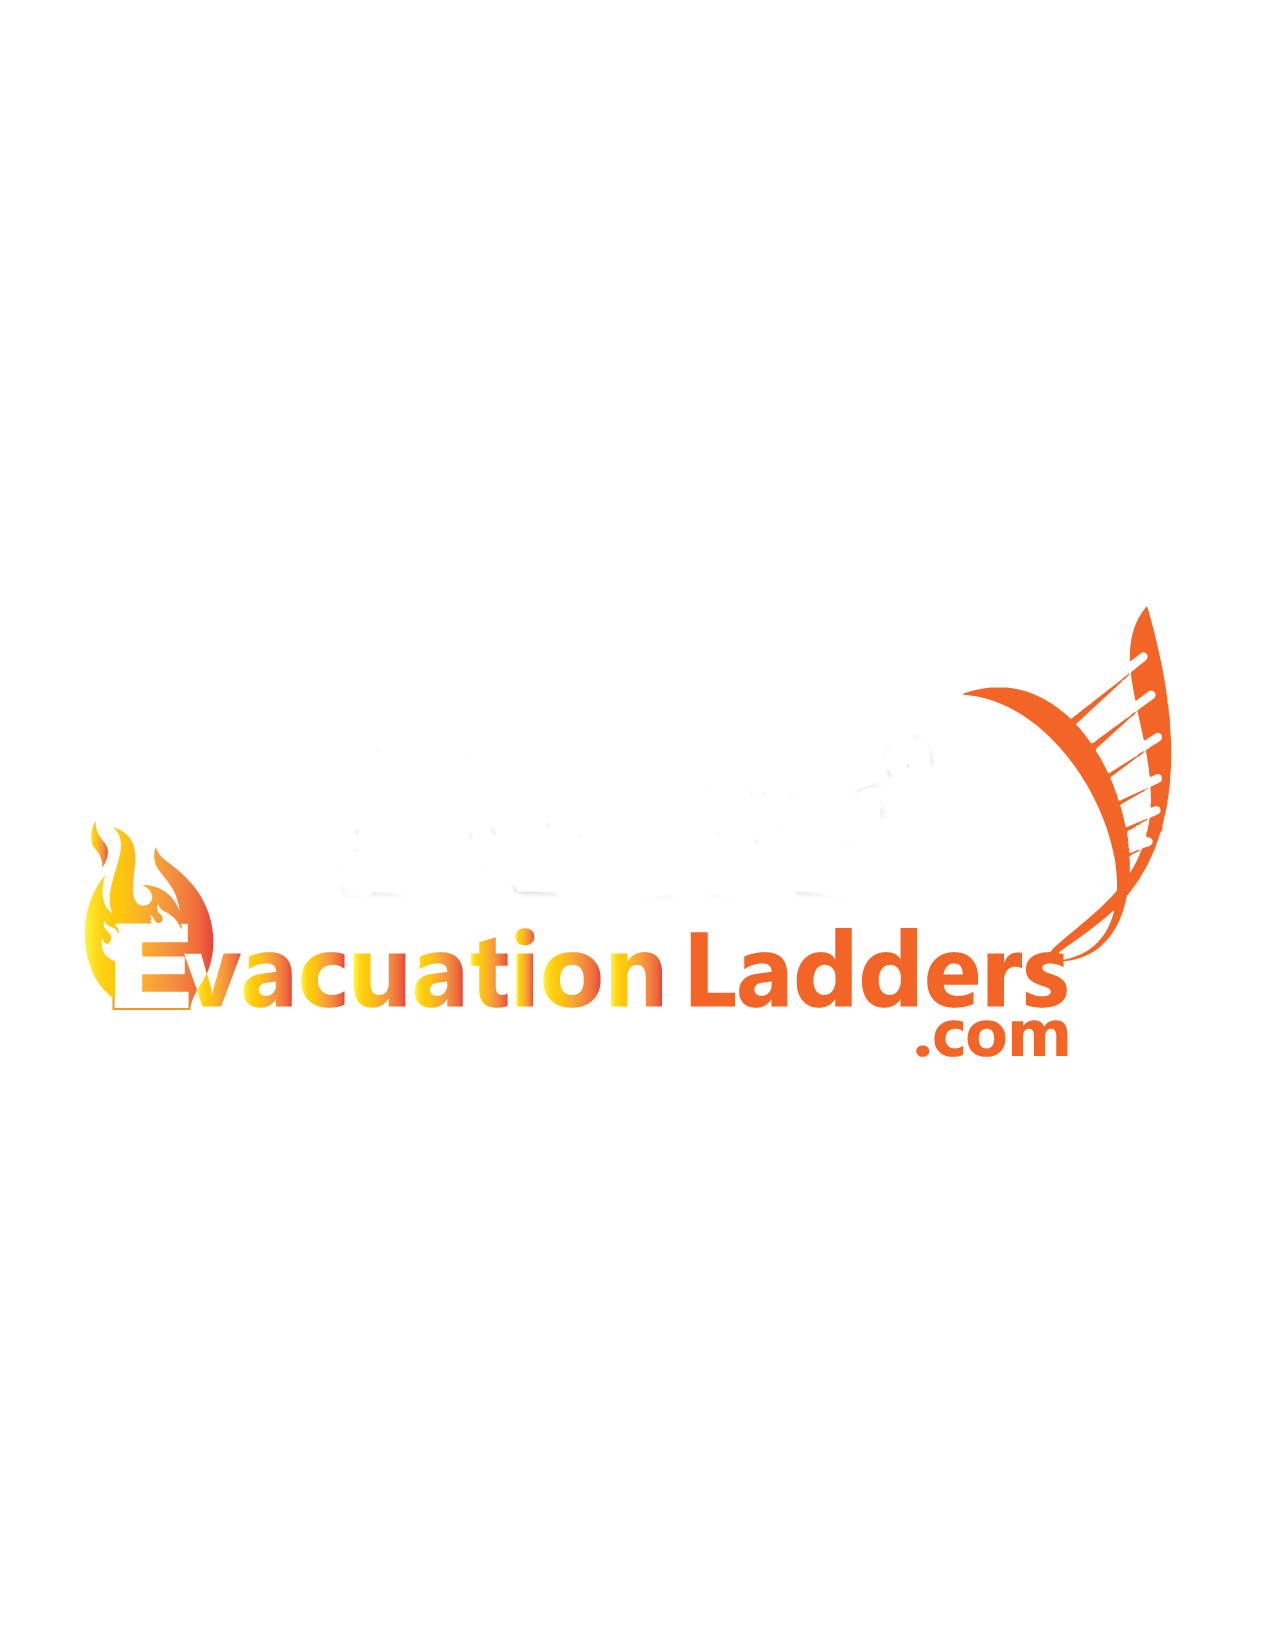 logo in red & orange colours of fire with ladder